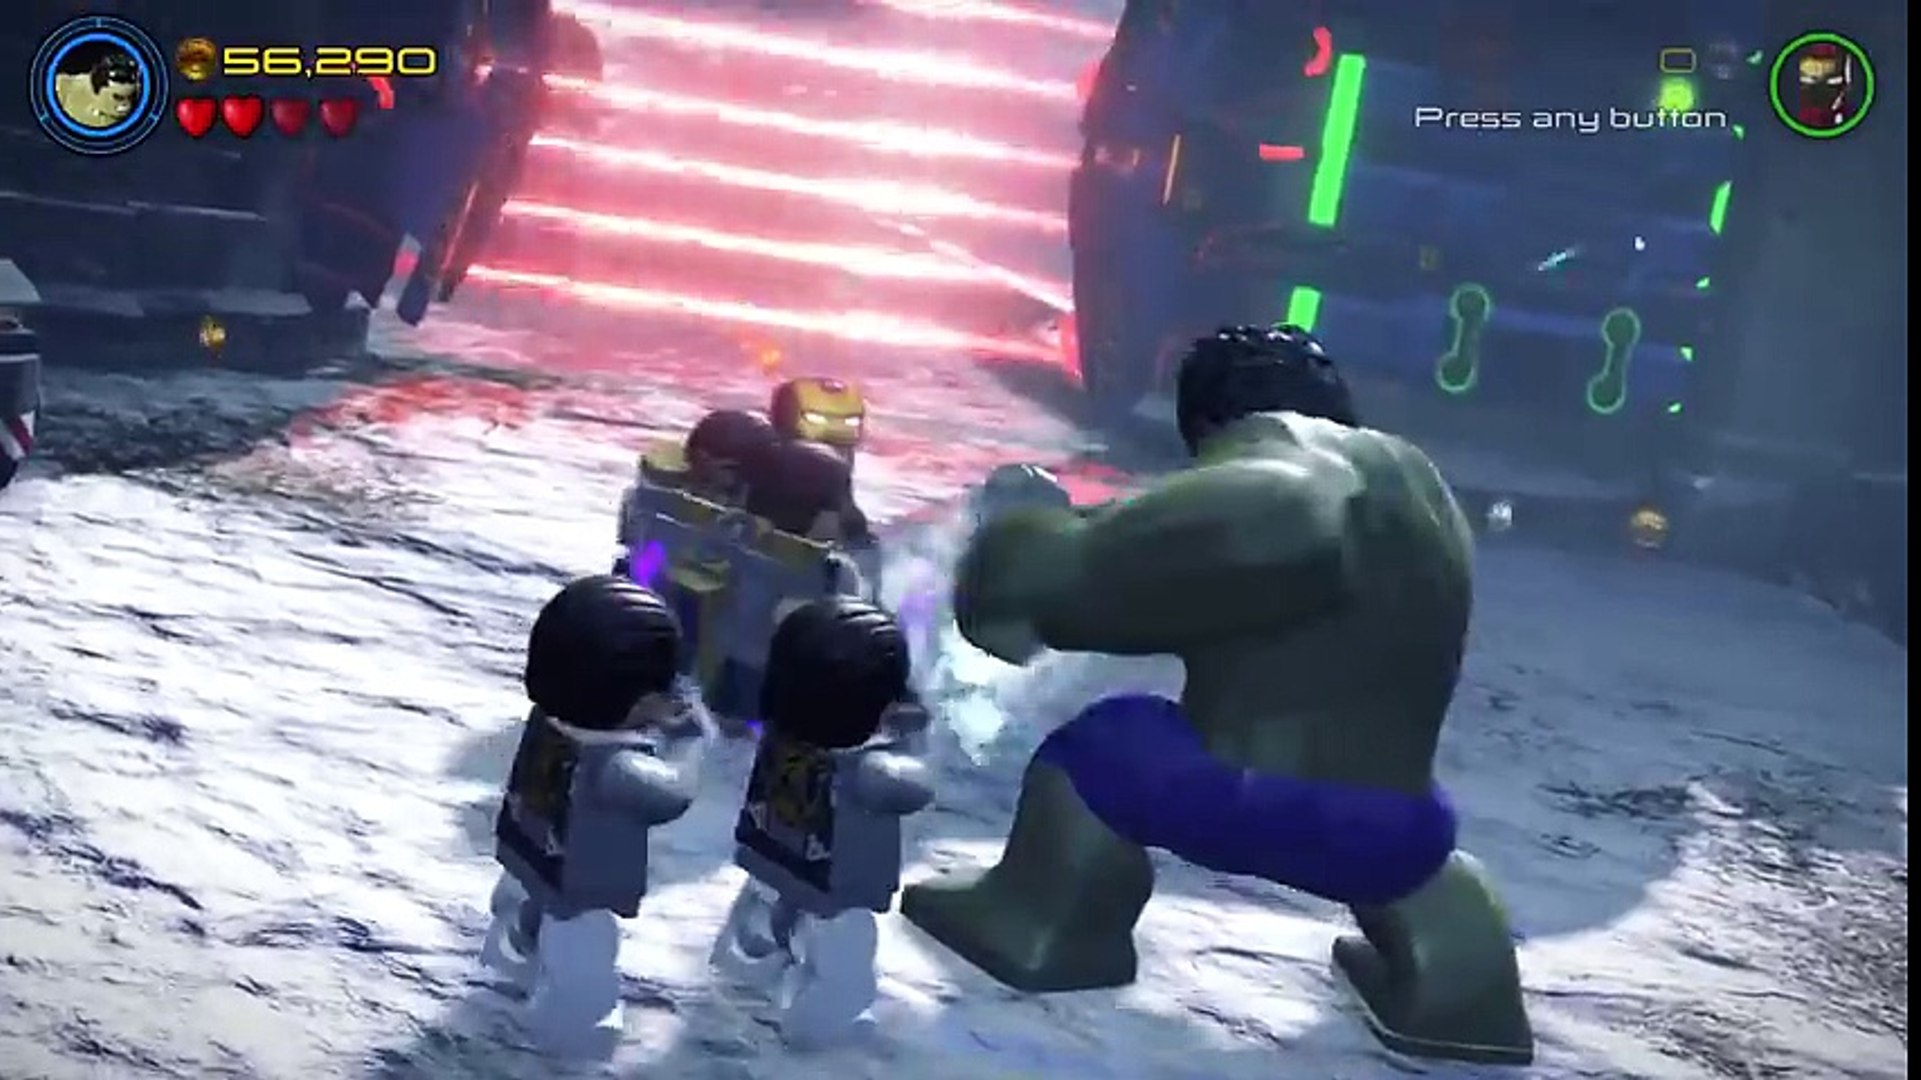 Lego Marvel Gameplay 1 - Ultron (Video Game) - video Dailymotion